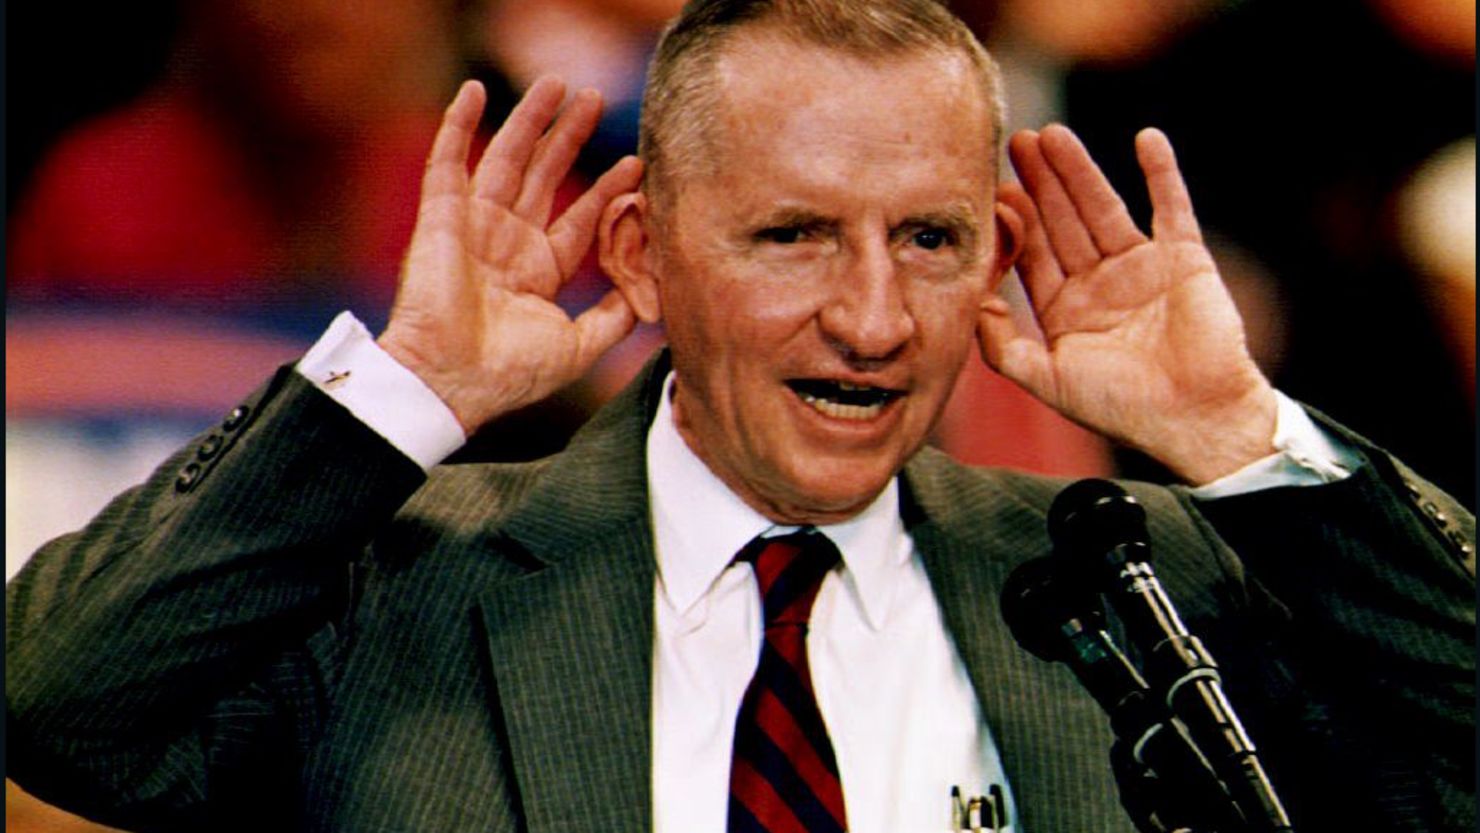 Third-party candidate Ross Perot won nearly 20% of the vote in 1992 but not a single electoral vote